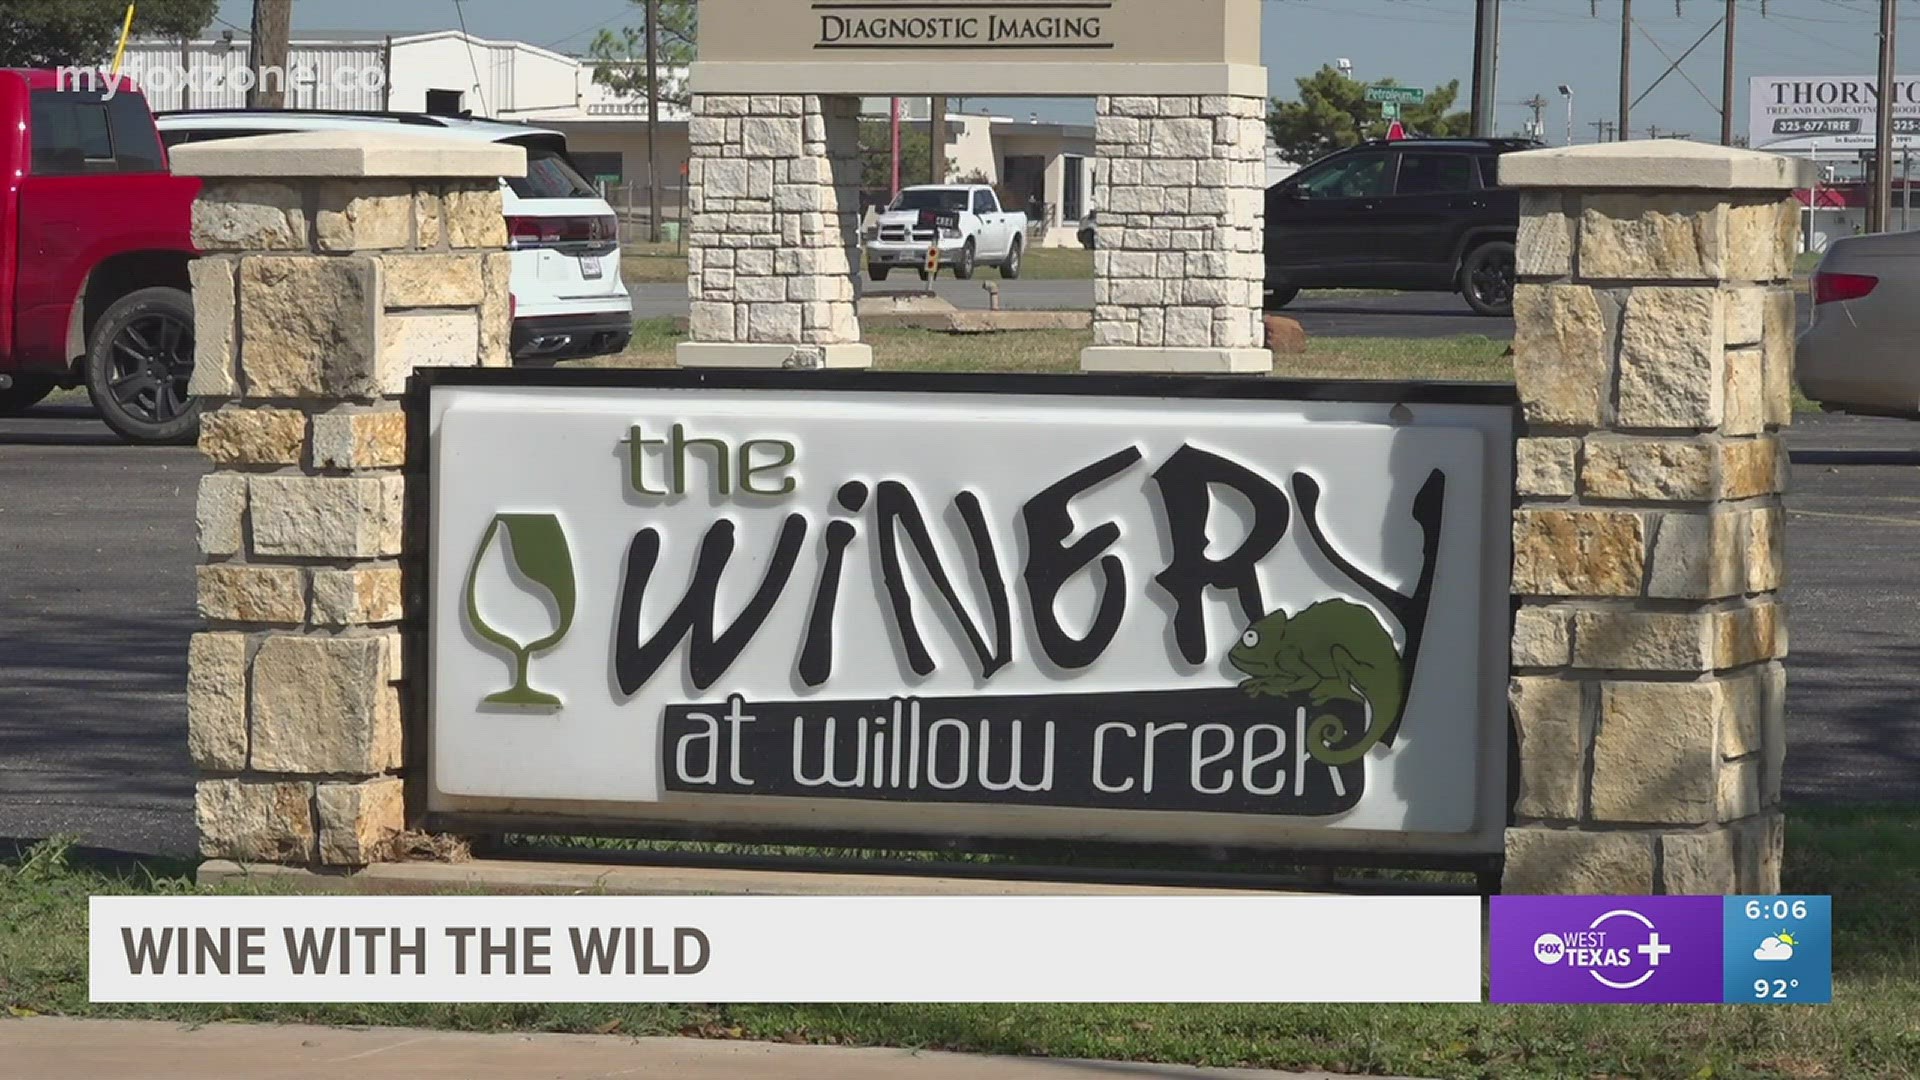 The Big Country Rehabilitation Center will have its annual "Wine with the Wild" event at 5 p.m. Saturday, Sept. 23, at the Winery at Willow Creek in Abilene.